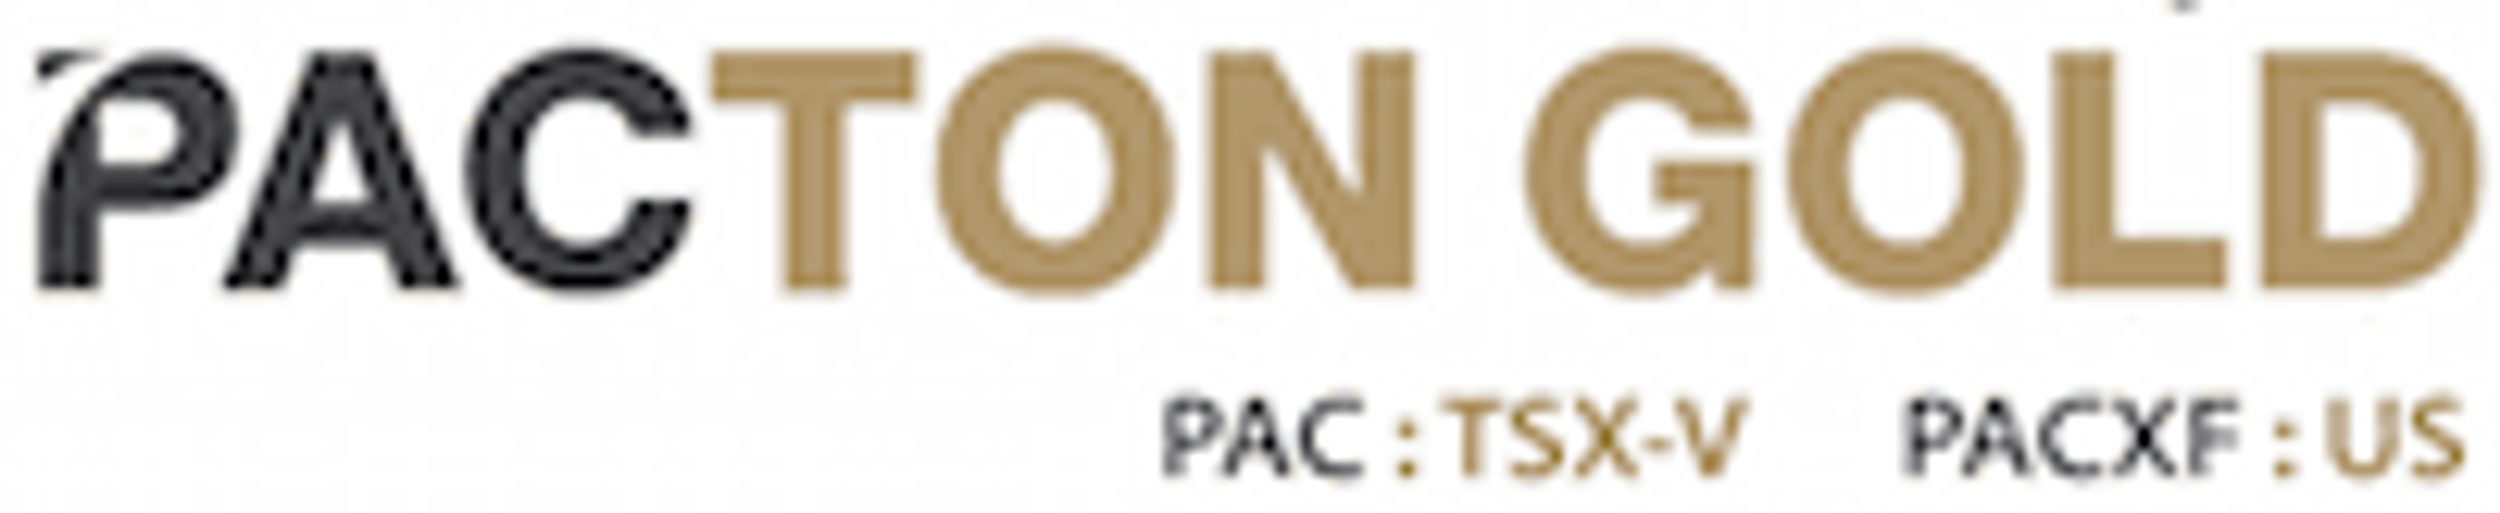 Pacton Enters into Definitive Agreement on the Drummond East Pty Ltd granted exploration licenses